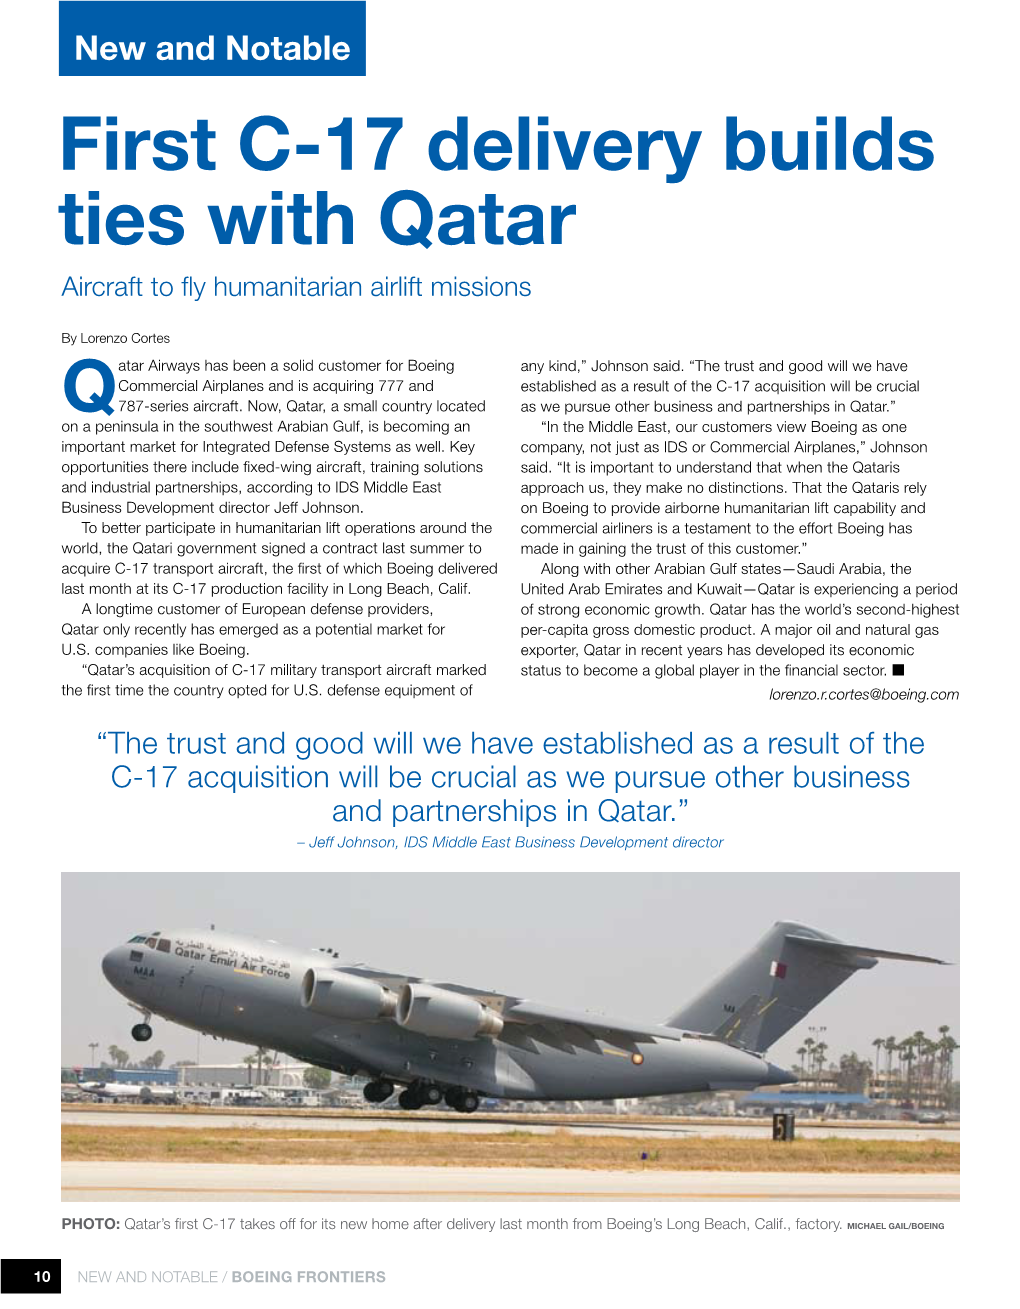 First C-17 Delivery Builds Ties with Qatar Aircraft to Fly Humanitarian Airlift Missions